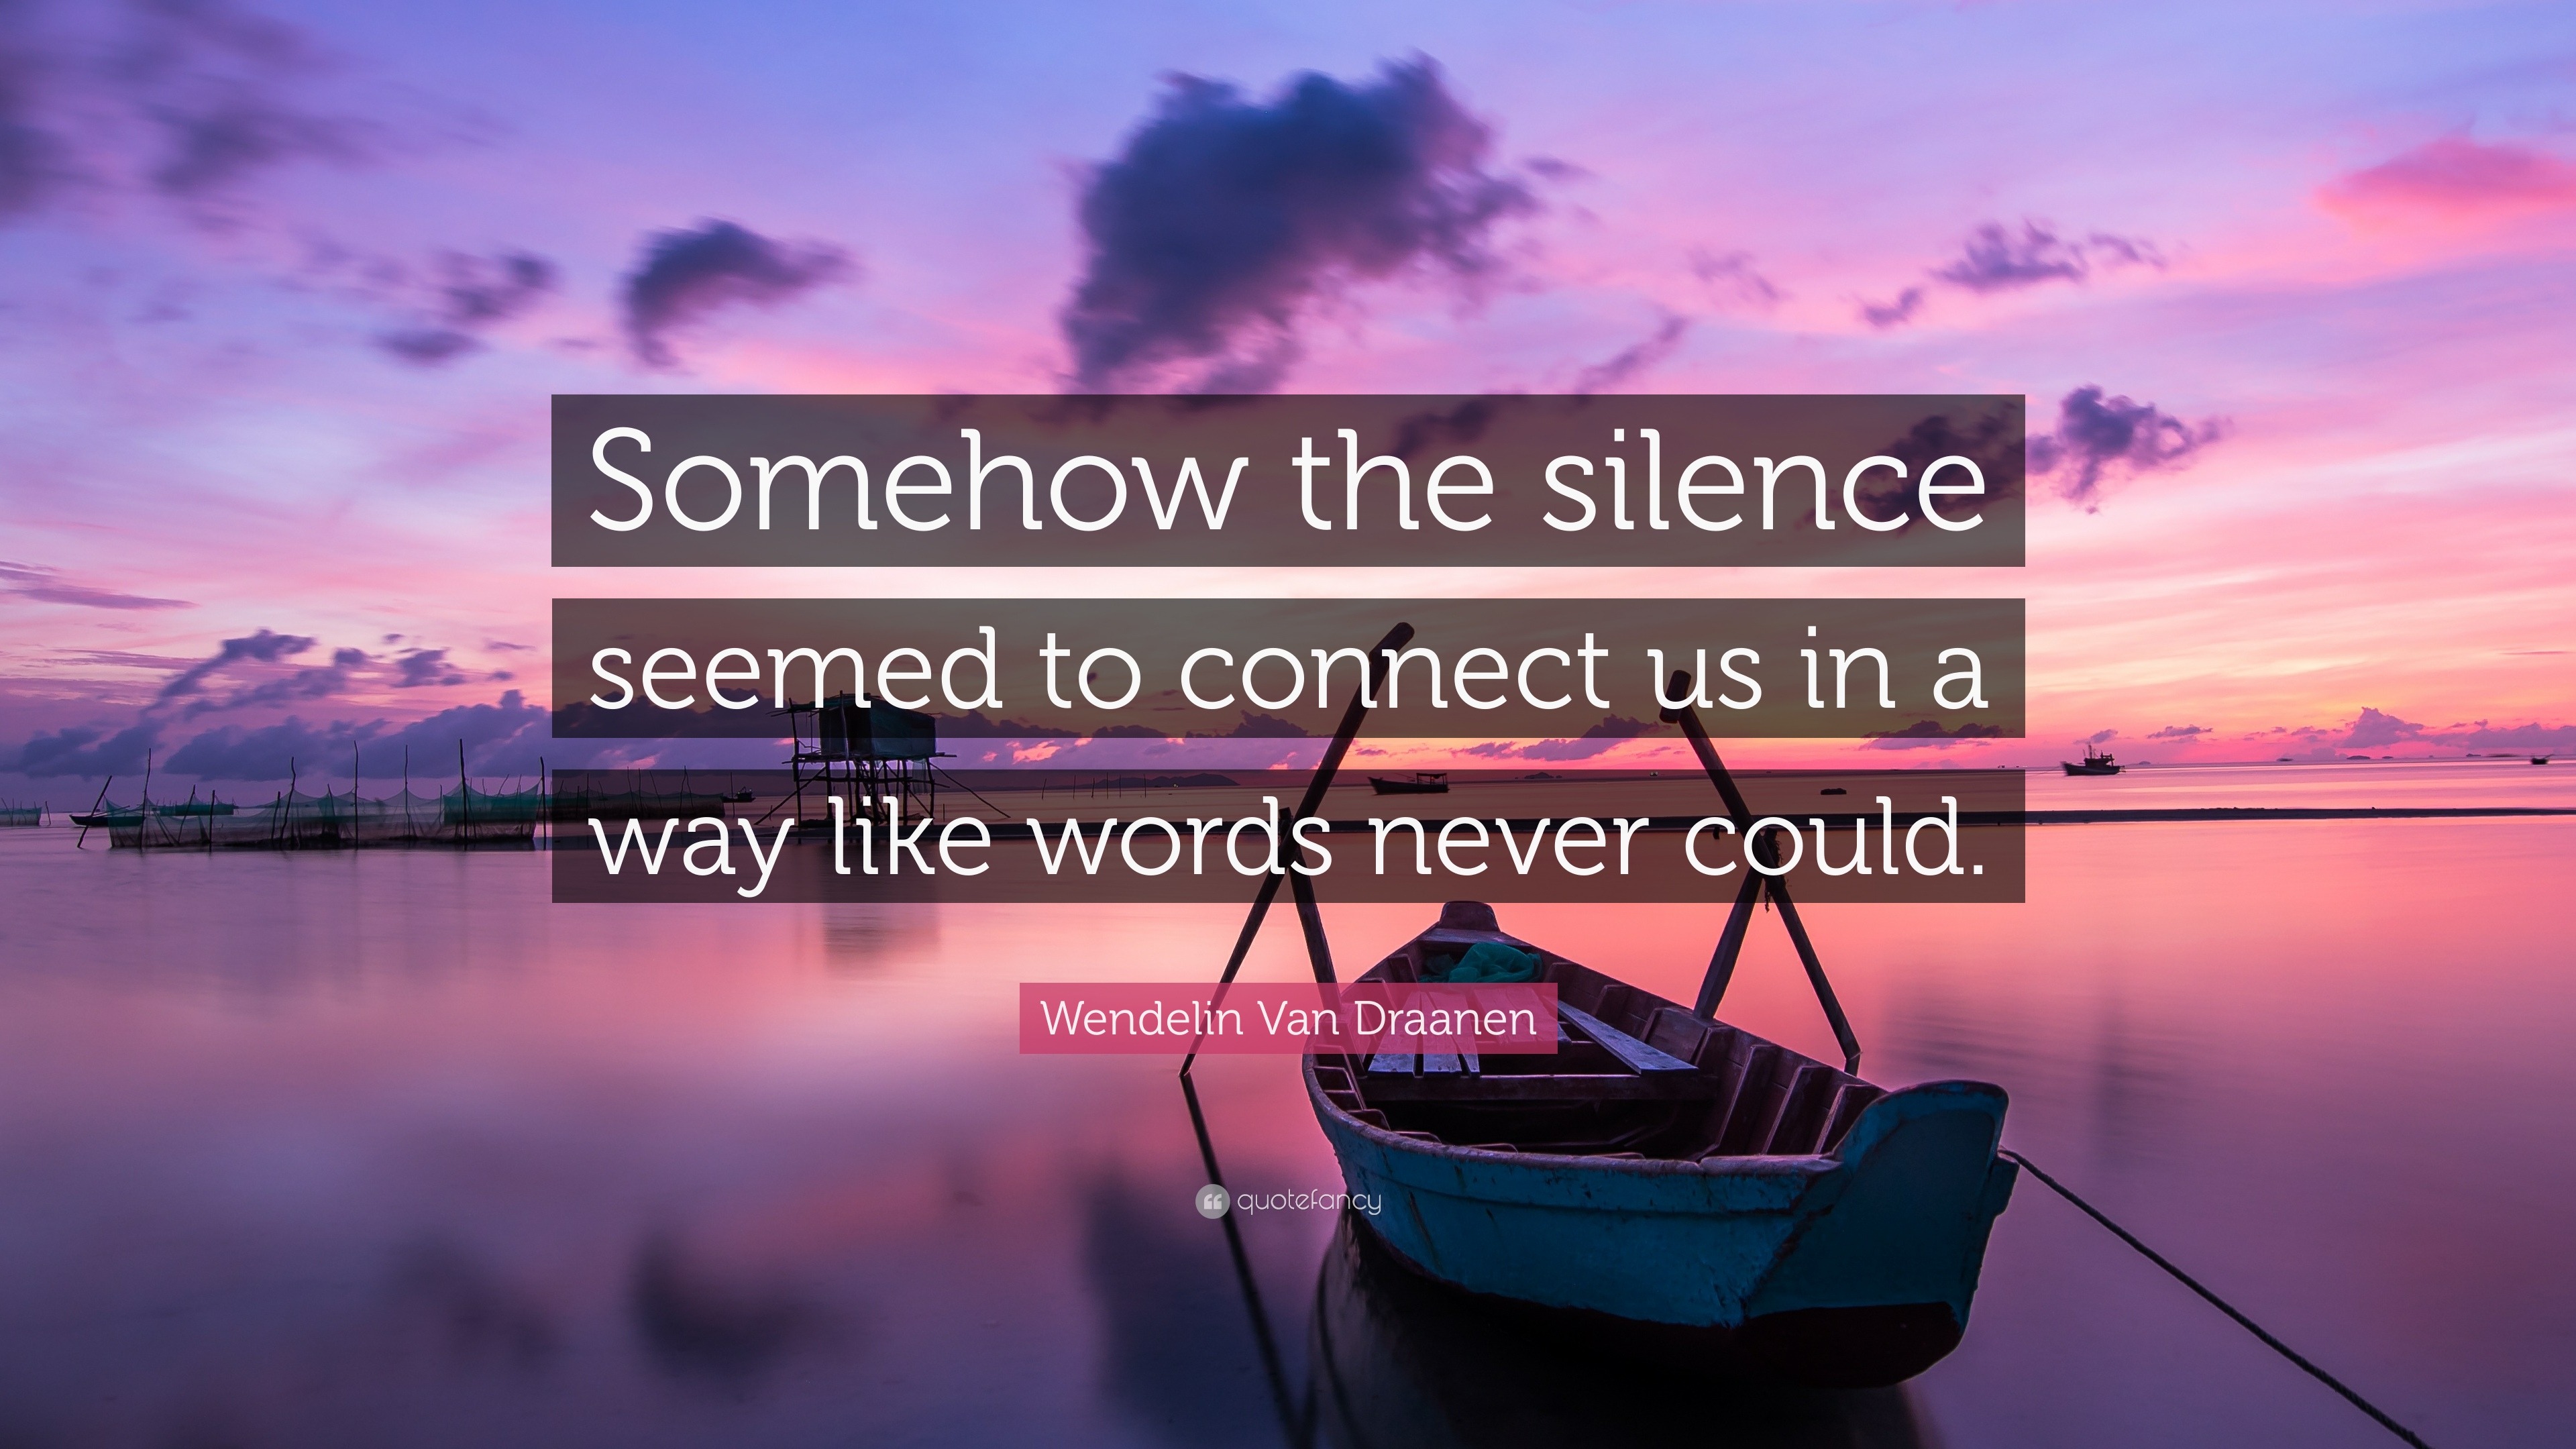 Wendelin Van Draanen Quote: “Somehow the silence seemed to connect us ...